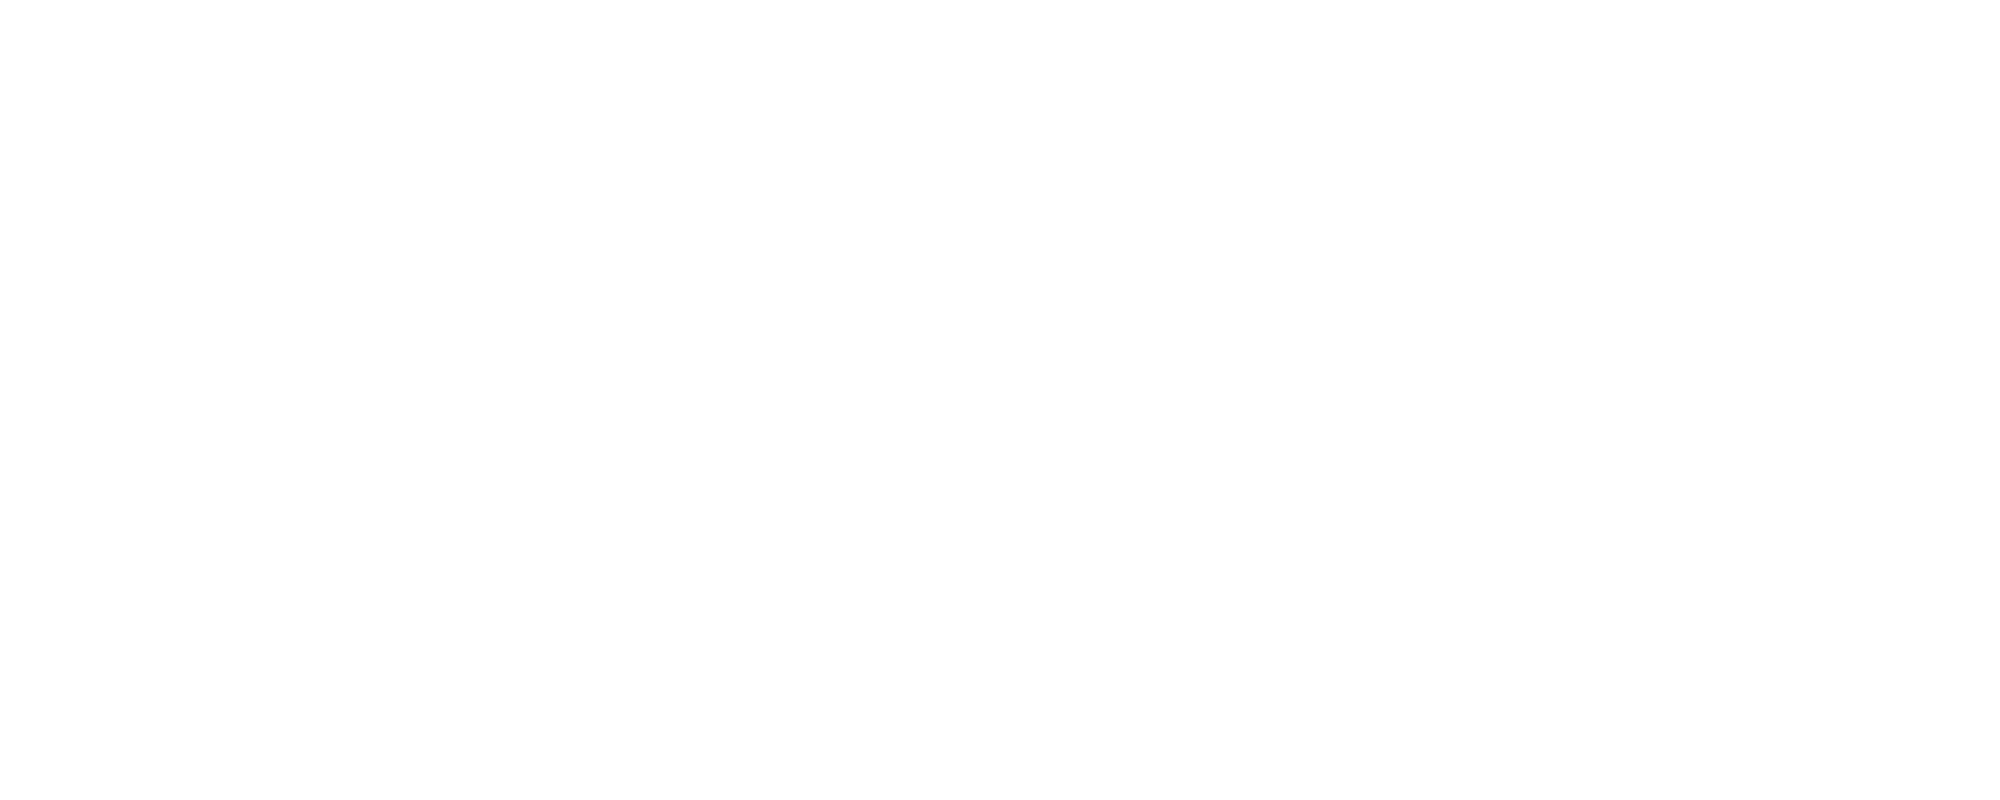 OVATION TV ANNOUNCES 26 RECIPIENTS OF STAND FOR THE ARTS PUBLIC SERVICE ANNOUNCEMENTS